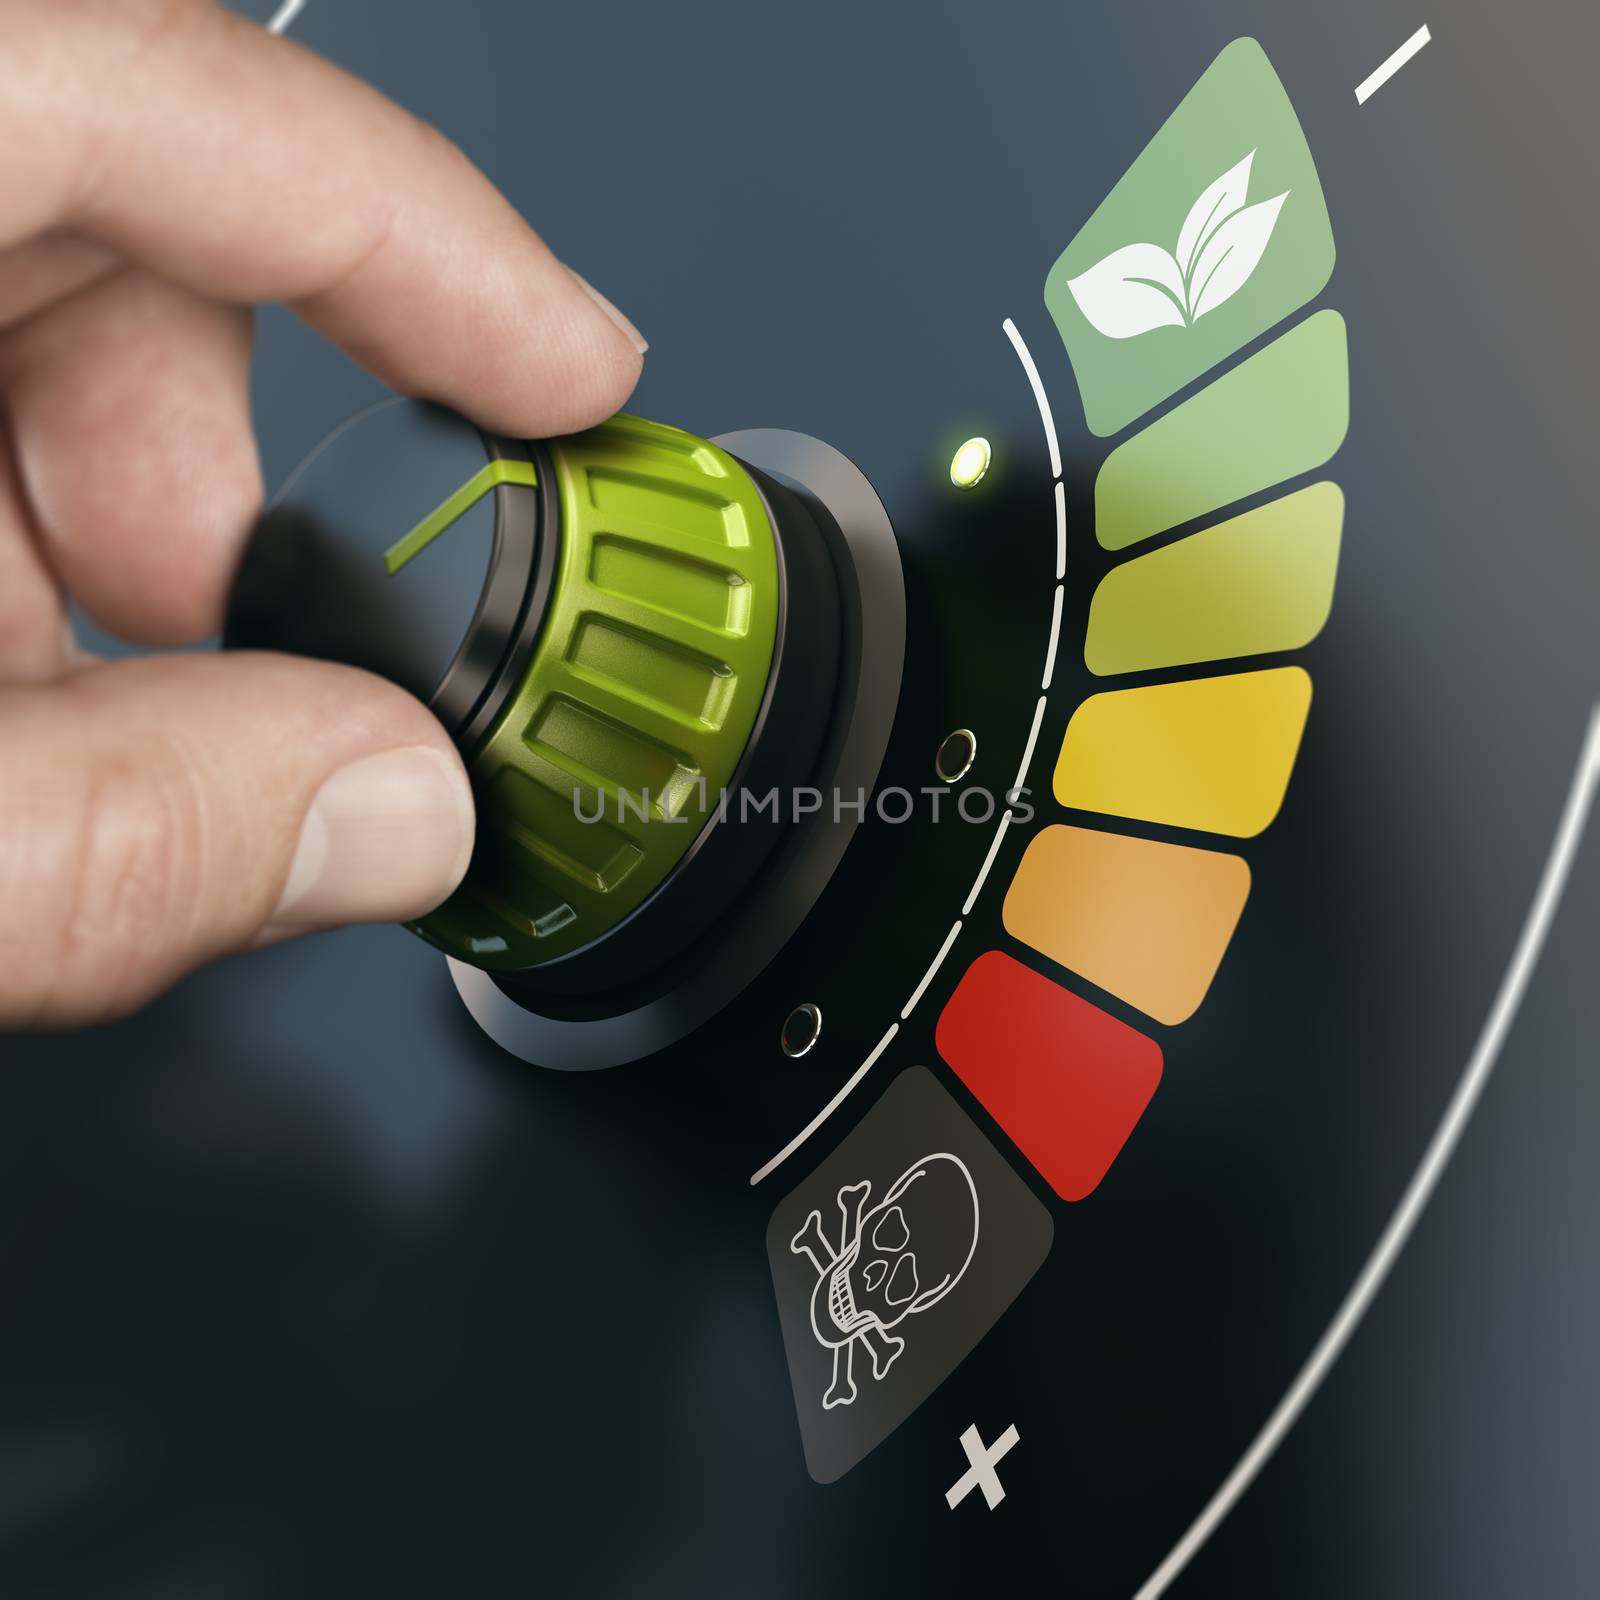 Hand turning a button to reduce chemical pesticides impact. Composite image between a hand photography and a 3D background.